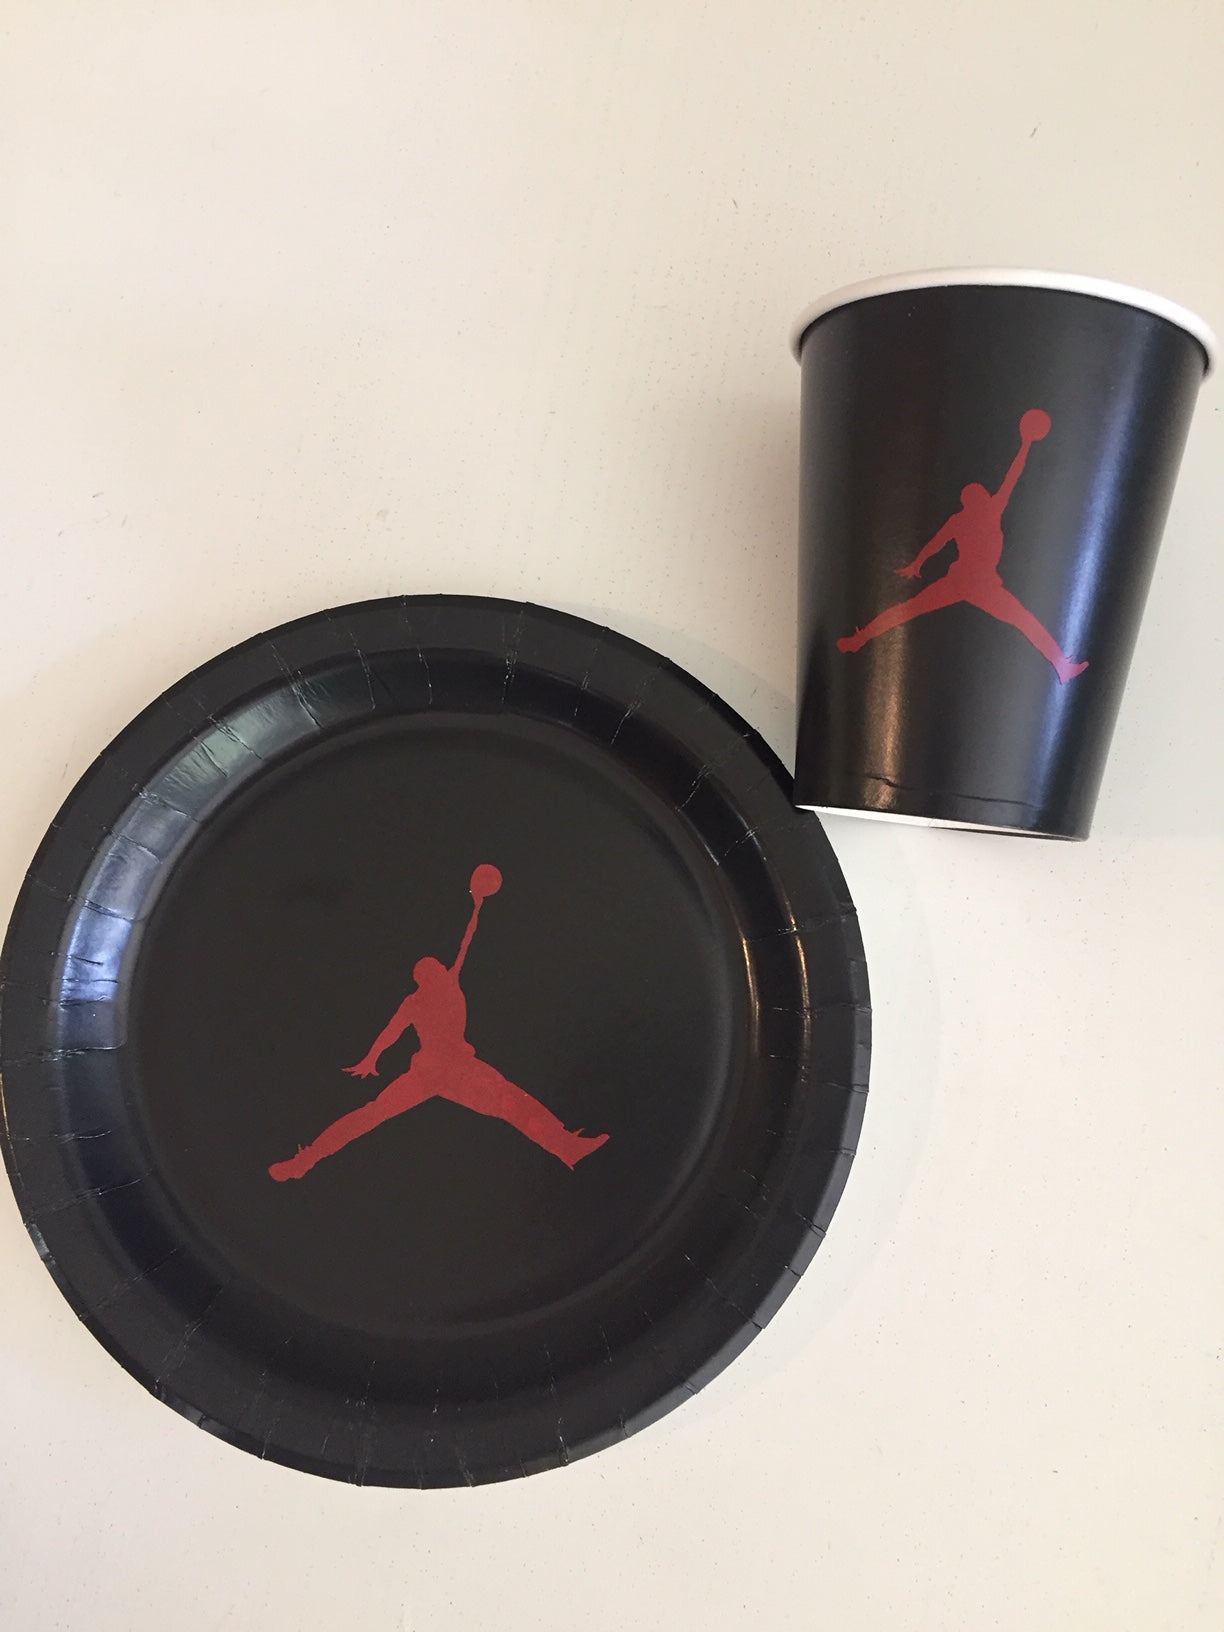 Jumpman themed party